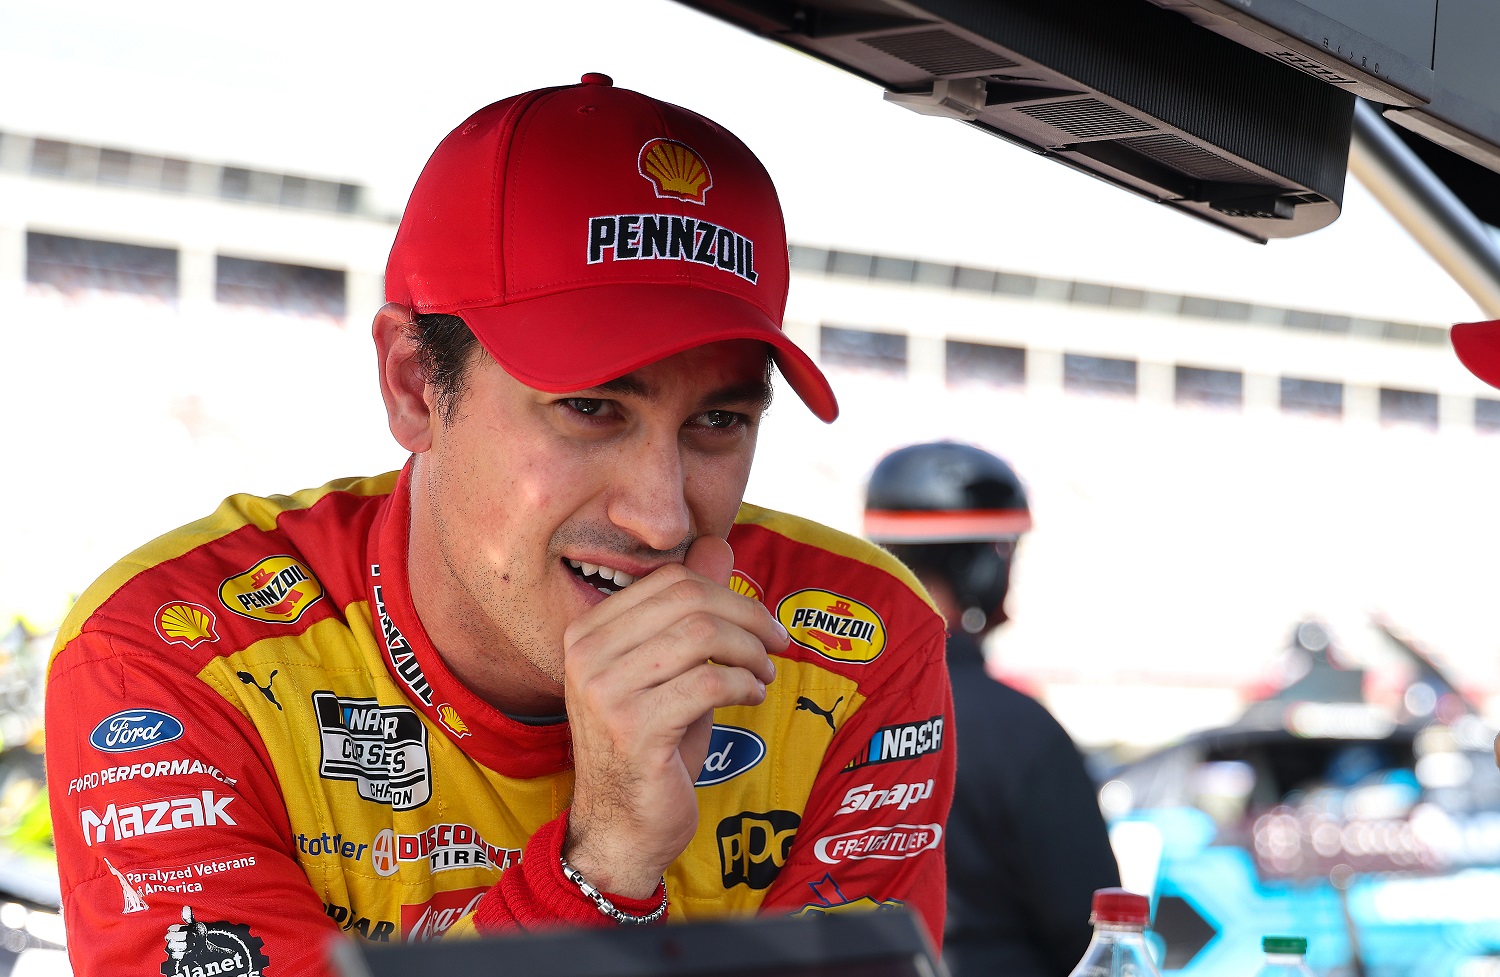 Joey Logano waits on the grid during practice for NASCAR Cup Series Bank of America Roval 400 at Charlotte Motor Speedway on Oct. 8, 2022 in Concord, North Carolina.